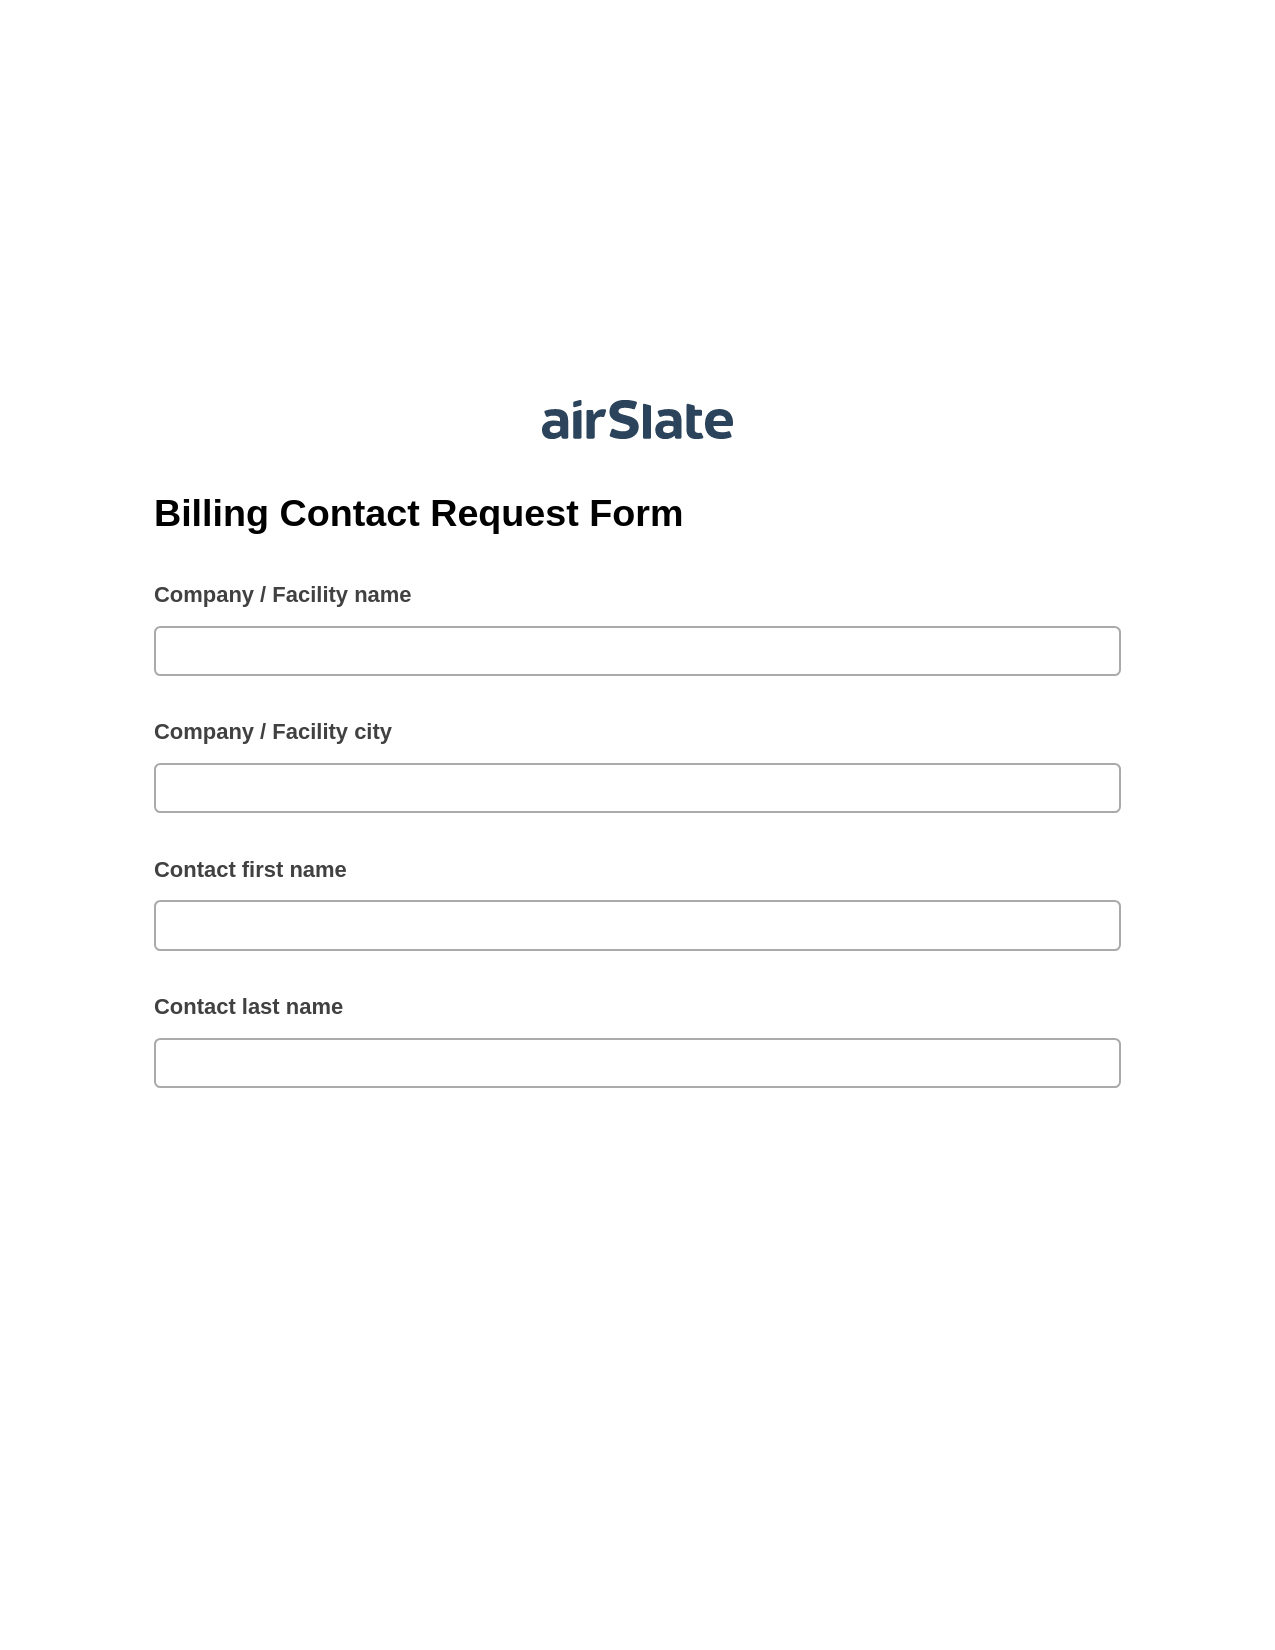 Billing Contact Request Form Pre-fill from Salesforce Record Bot, Webhook Bot, Export to NetSuite Record Bot